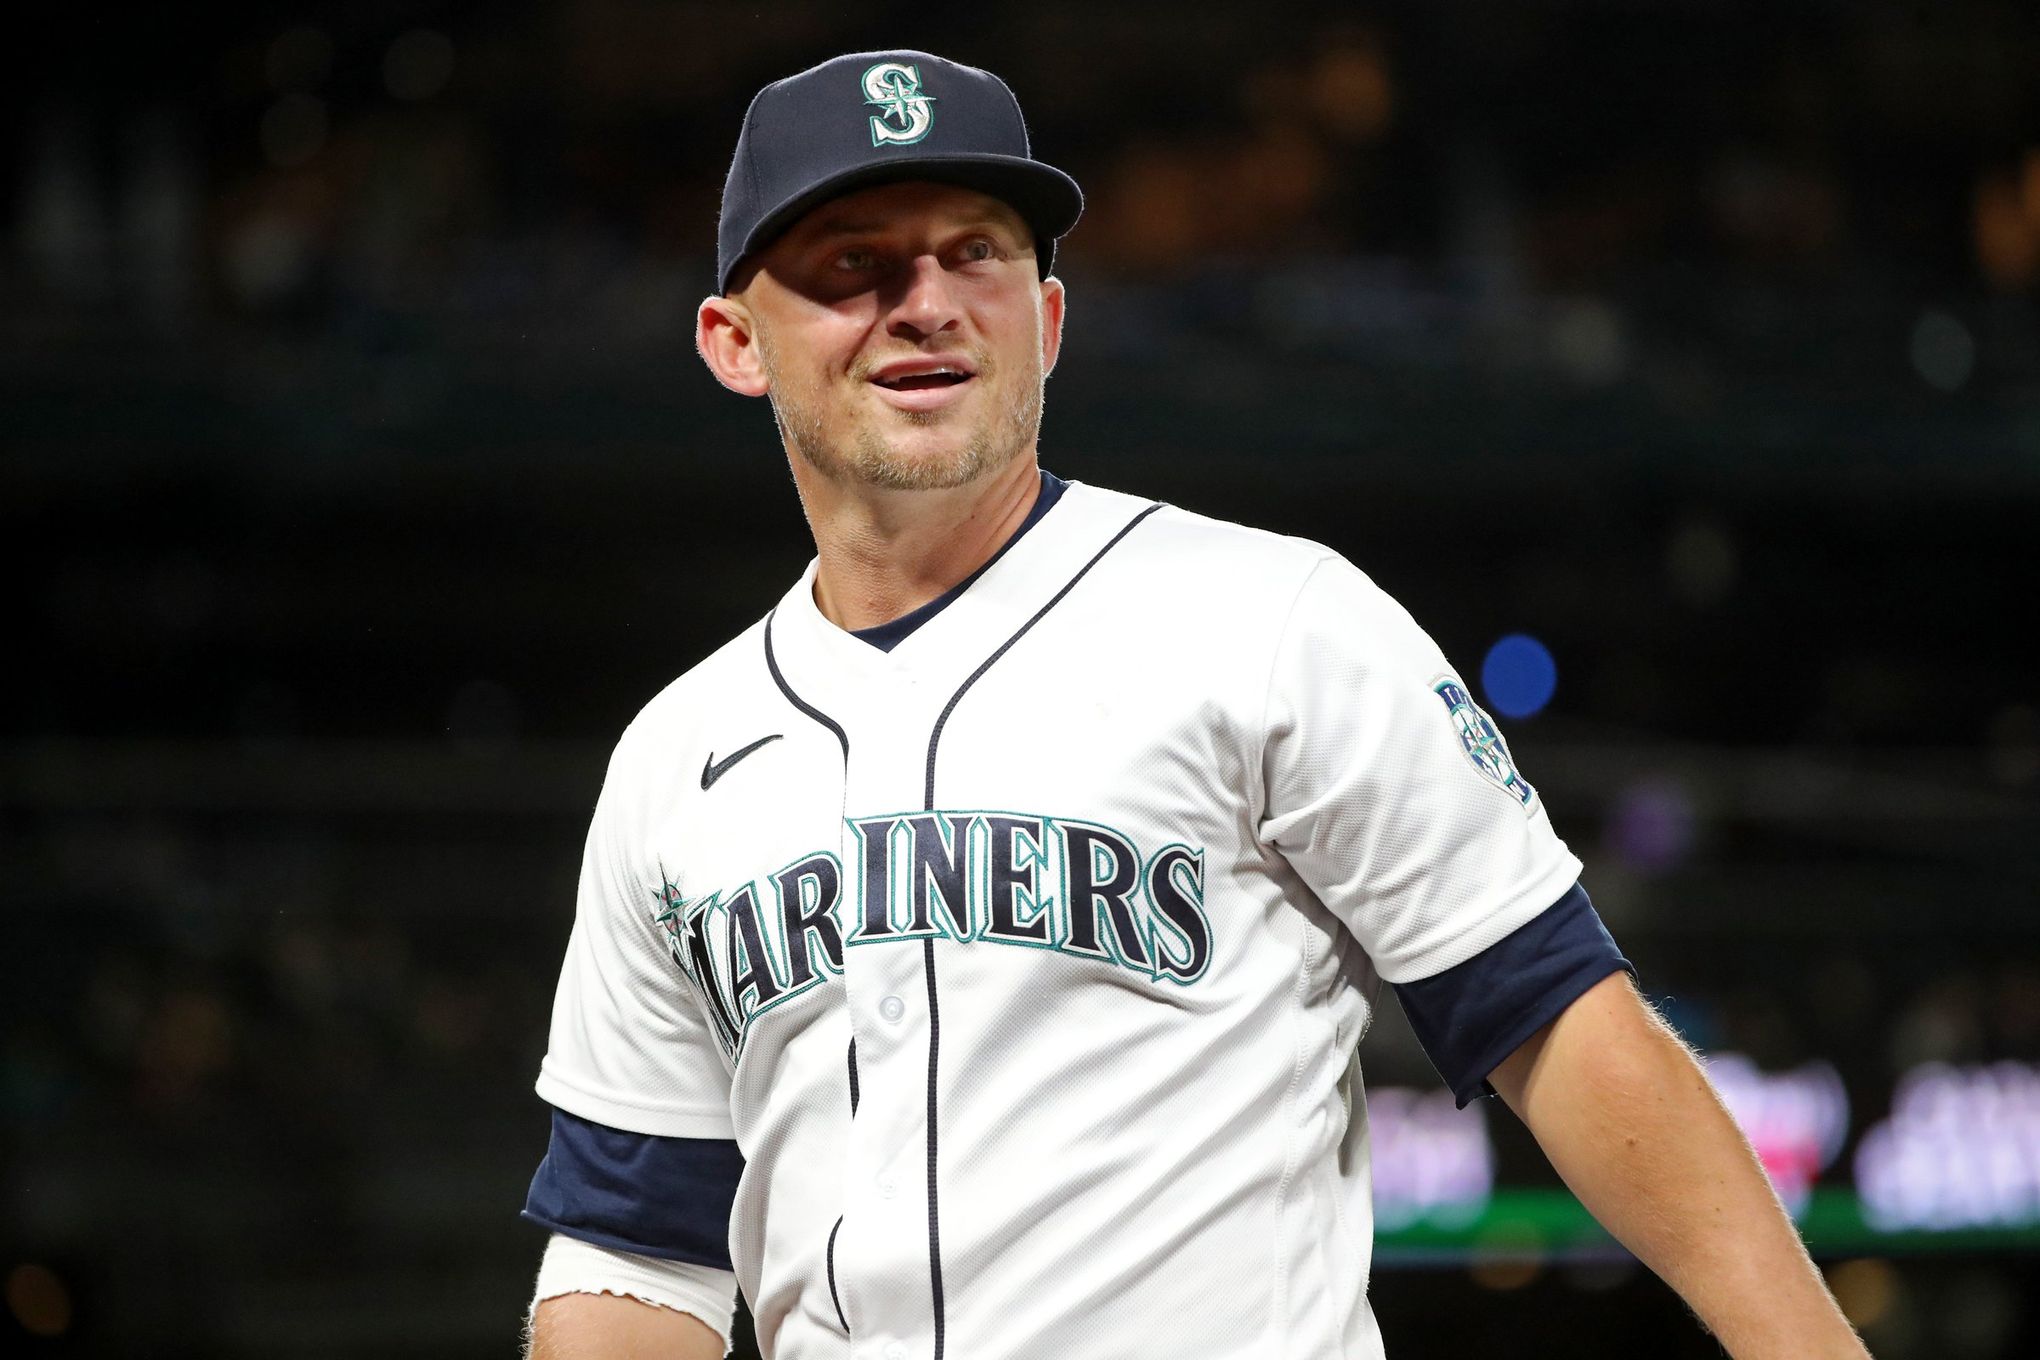 Why the (still teasing) Seager brothers, Mariners' Kyle and